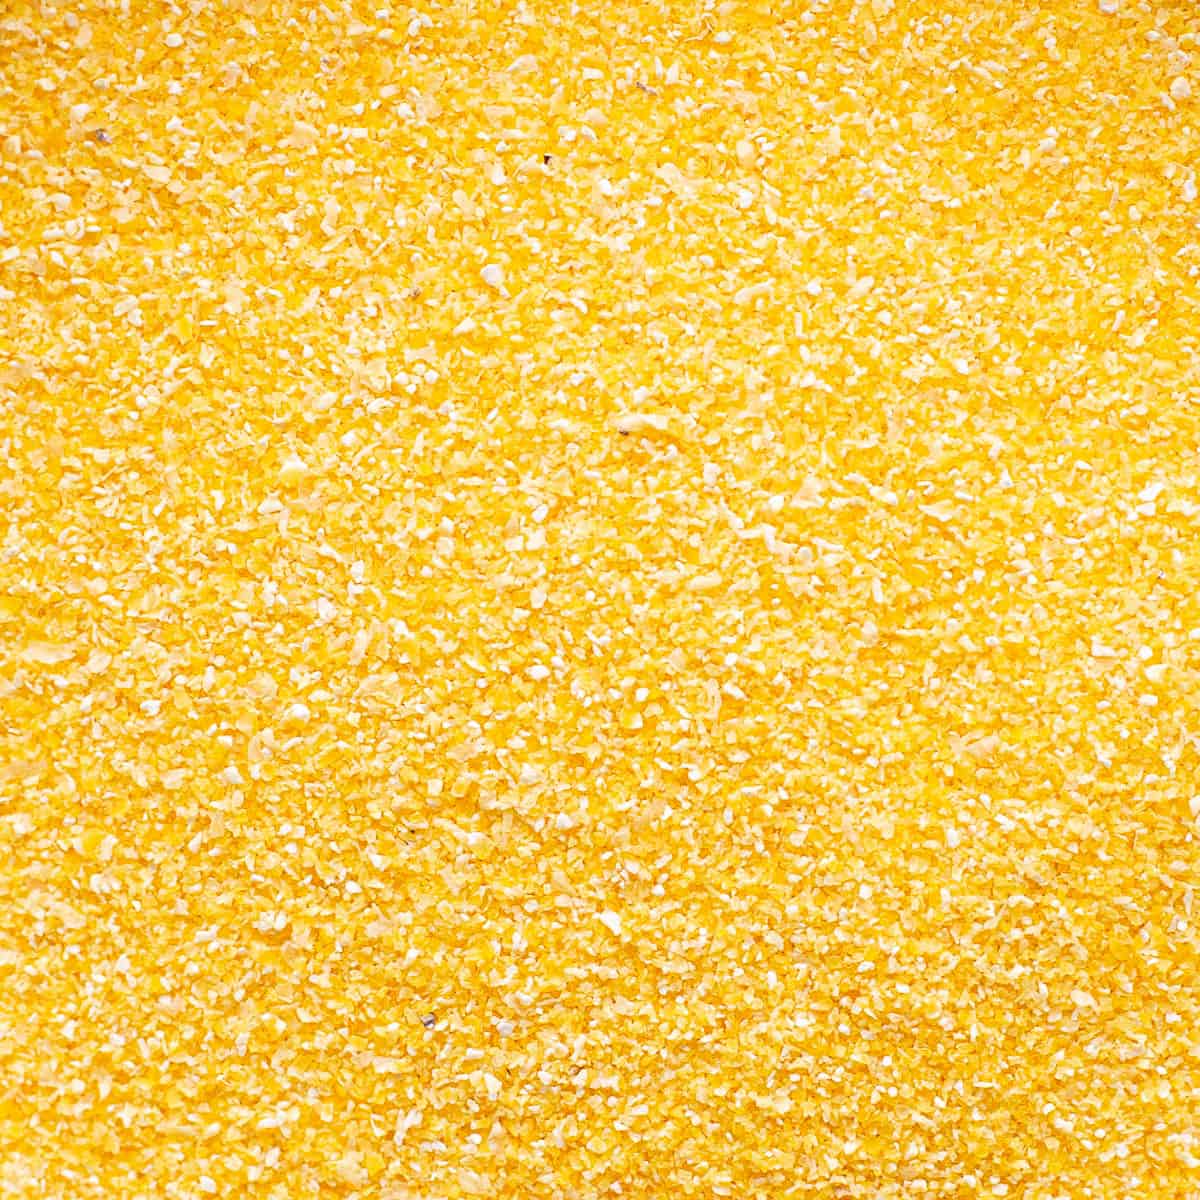 Fine polenta up close showing the gritty texture.